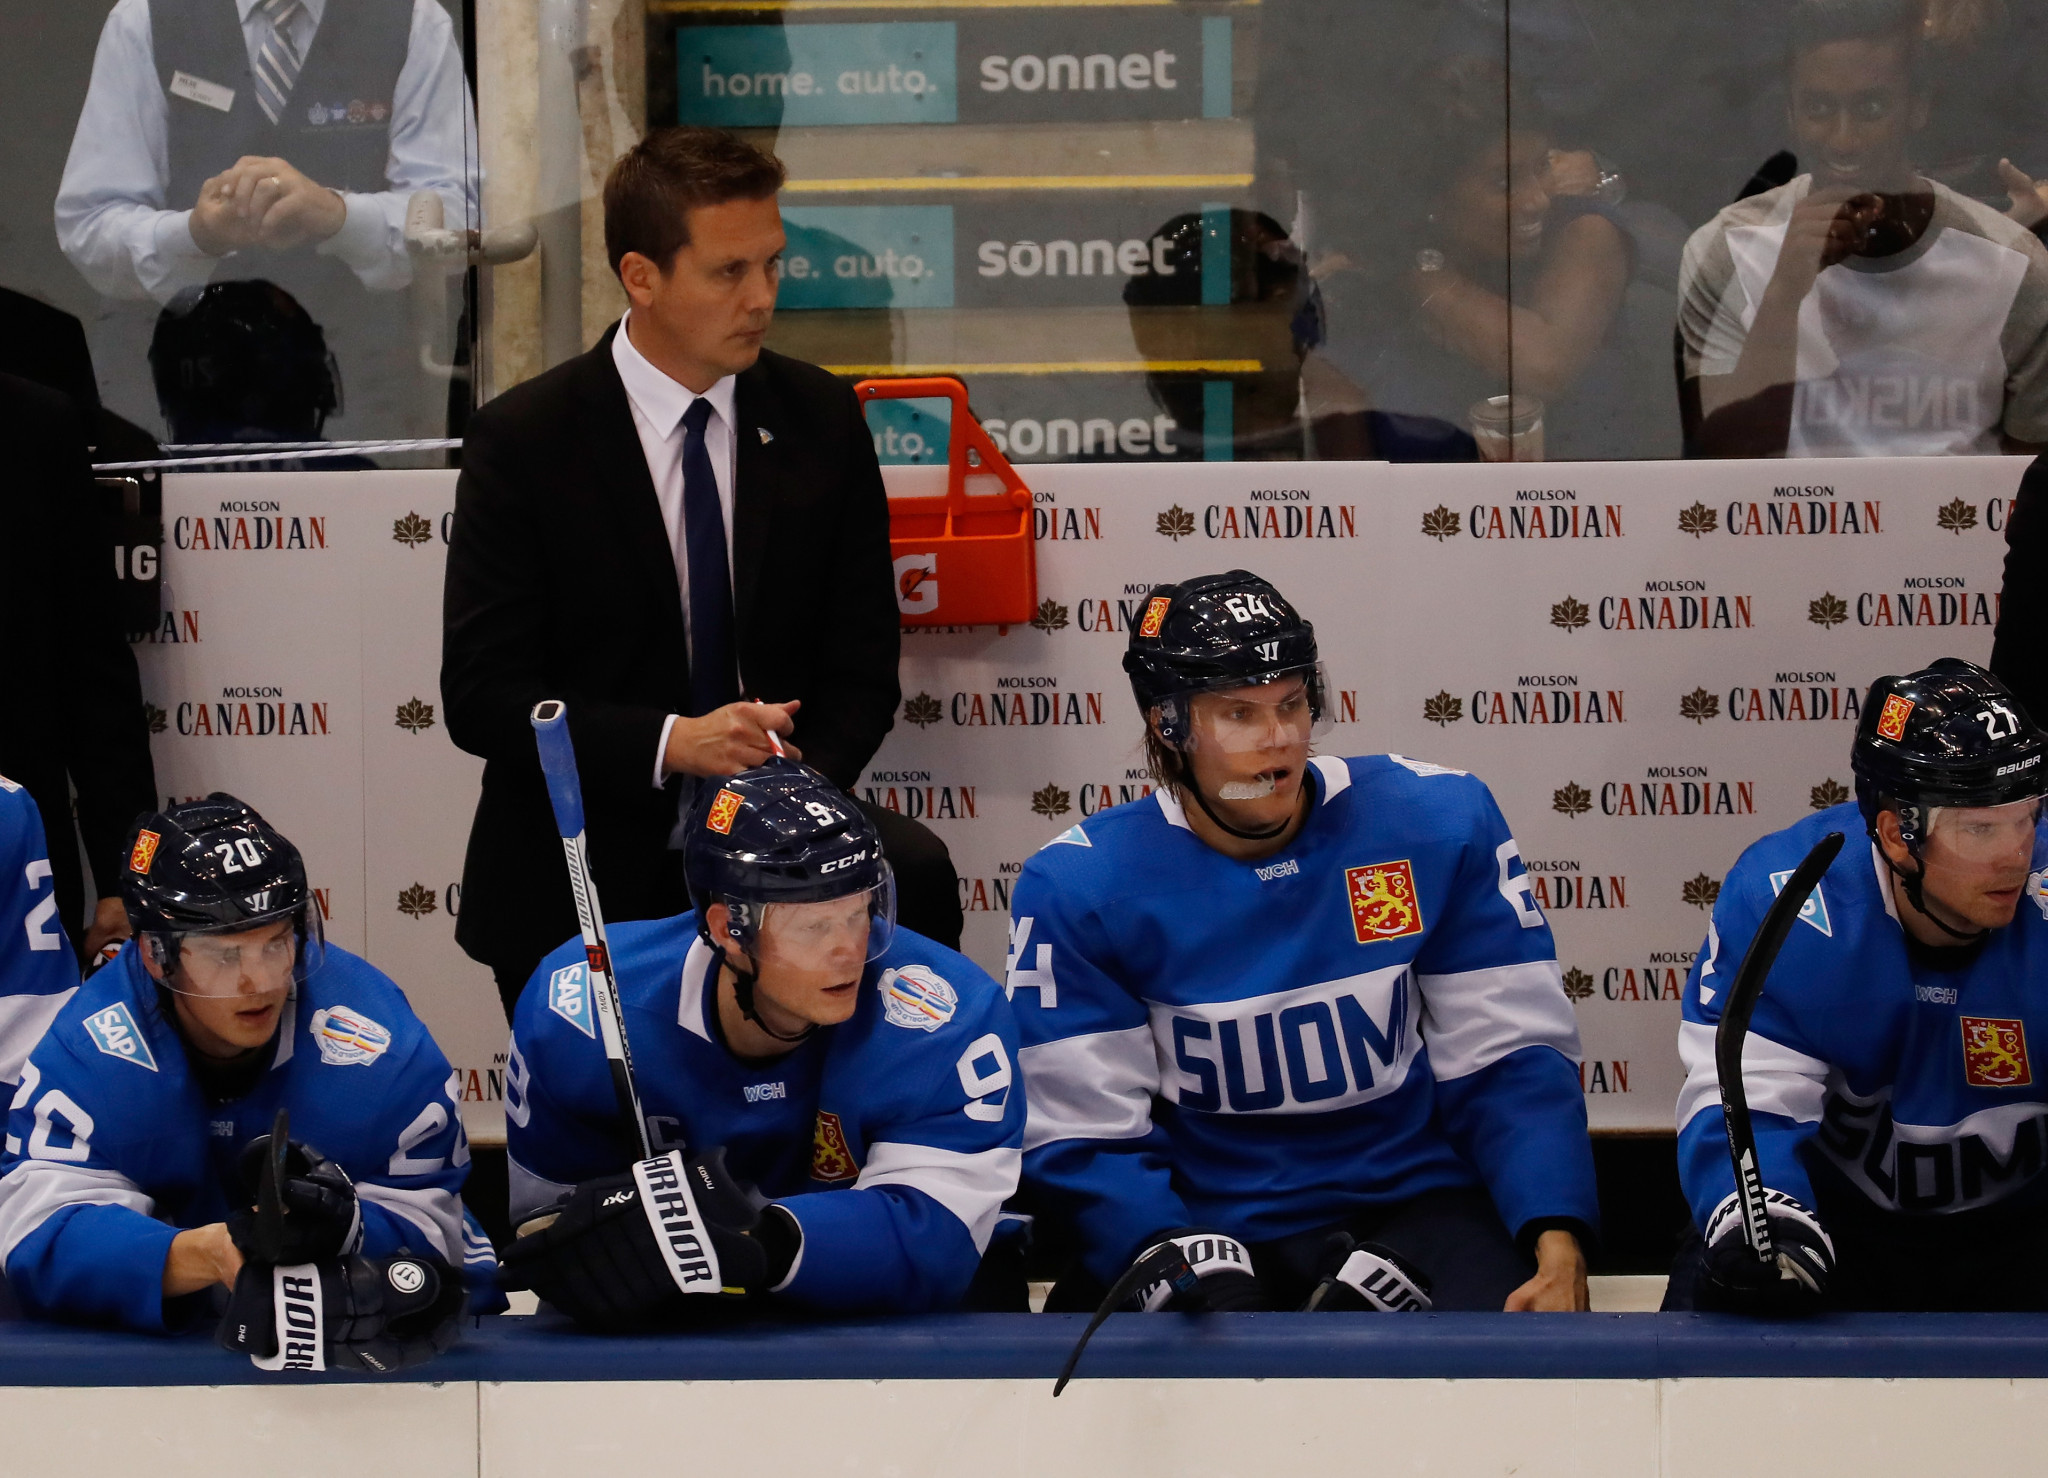 Lauri Marjamaki announced in August that he will depart as head coach of Finland's men's ice hockey team after next year's Winter Olympics and World Championship ©Getty Images